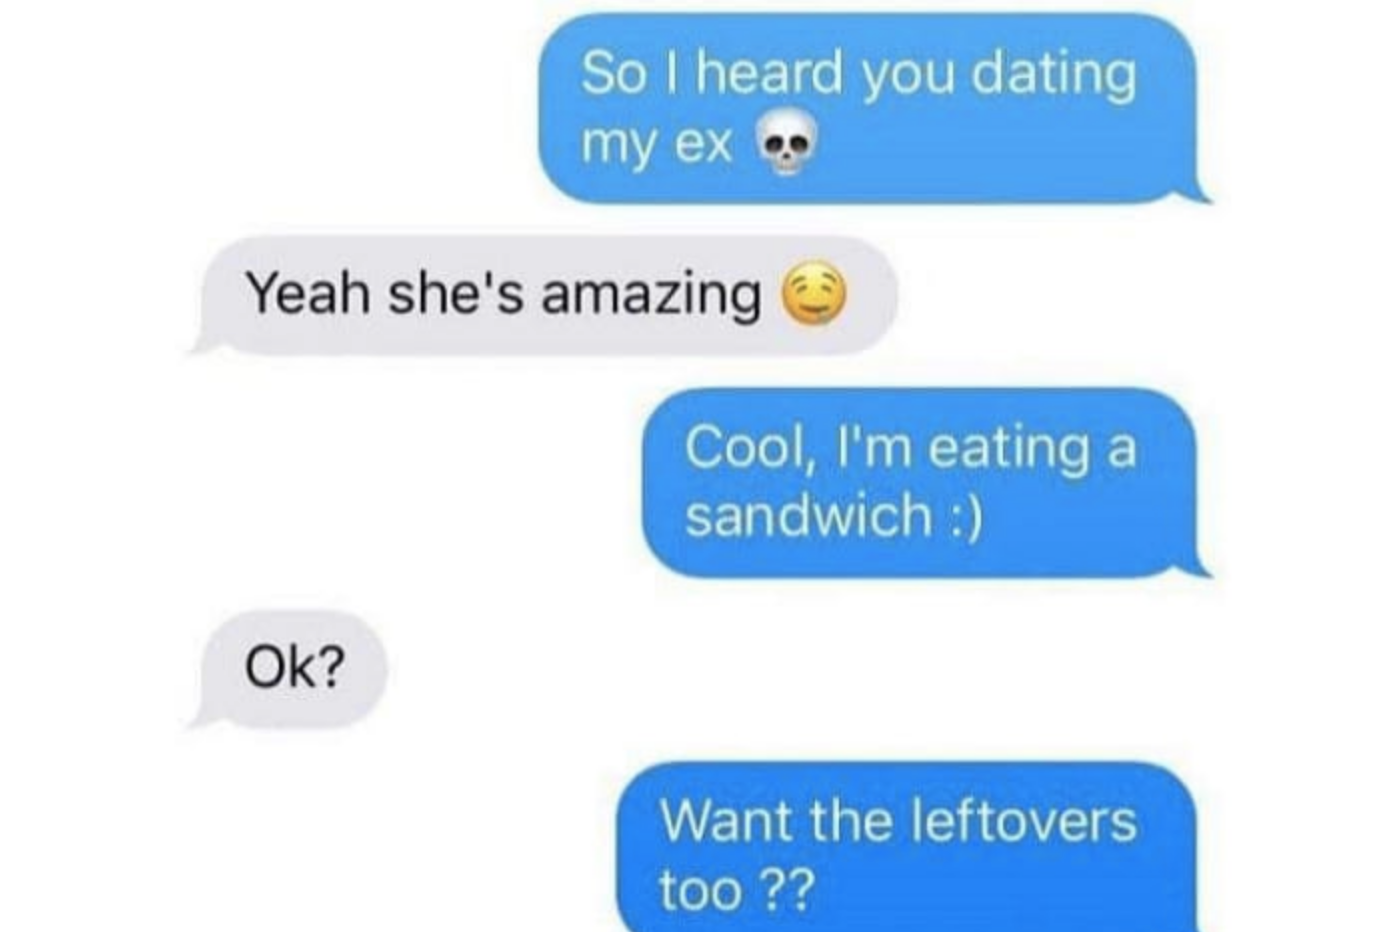 text convo where a man compares his ex to a sandwich and asks the guy if he wants those leftovers too